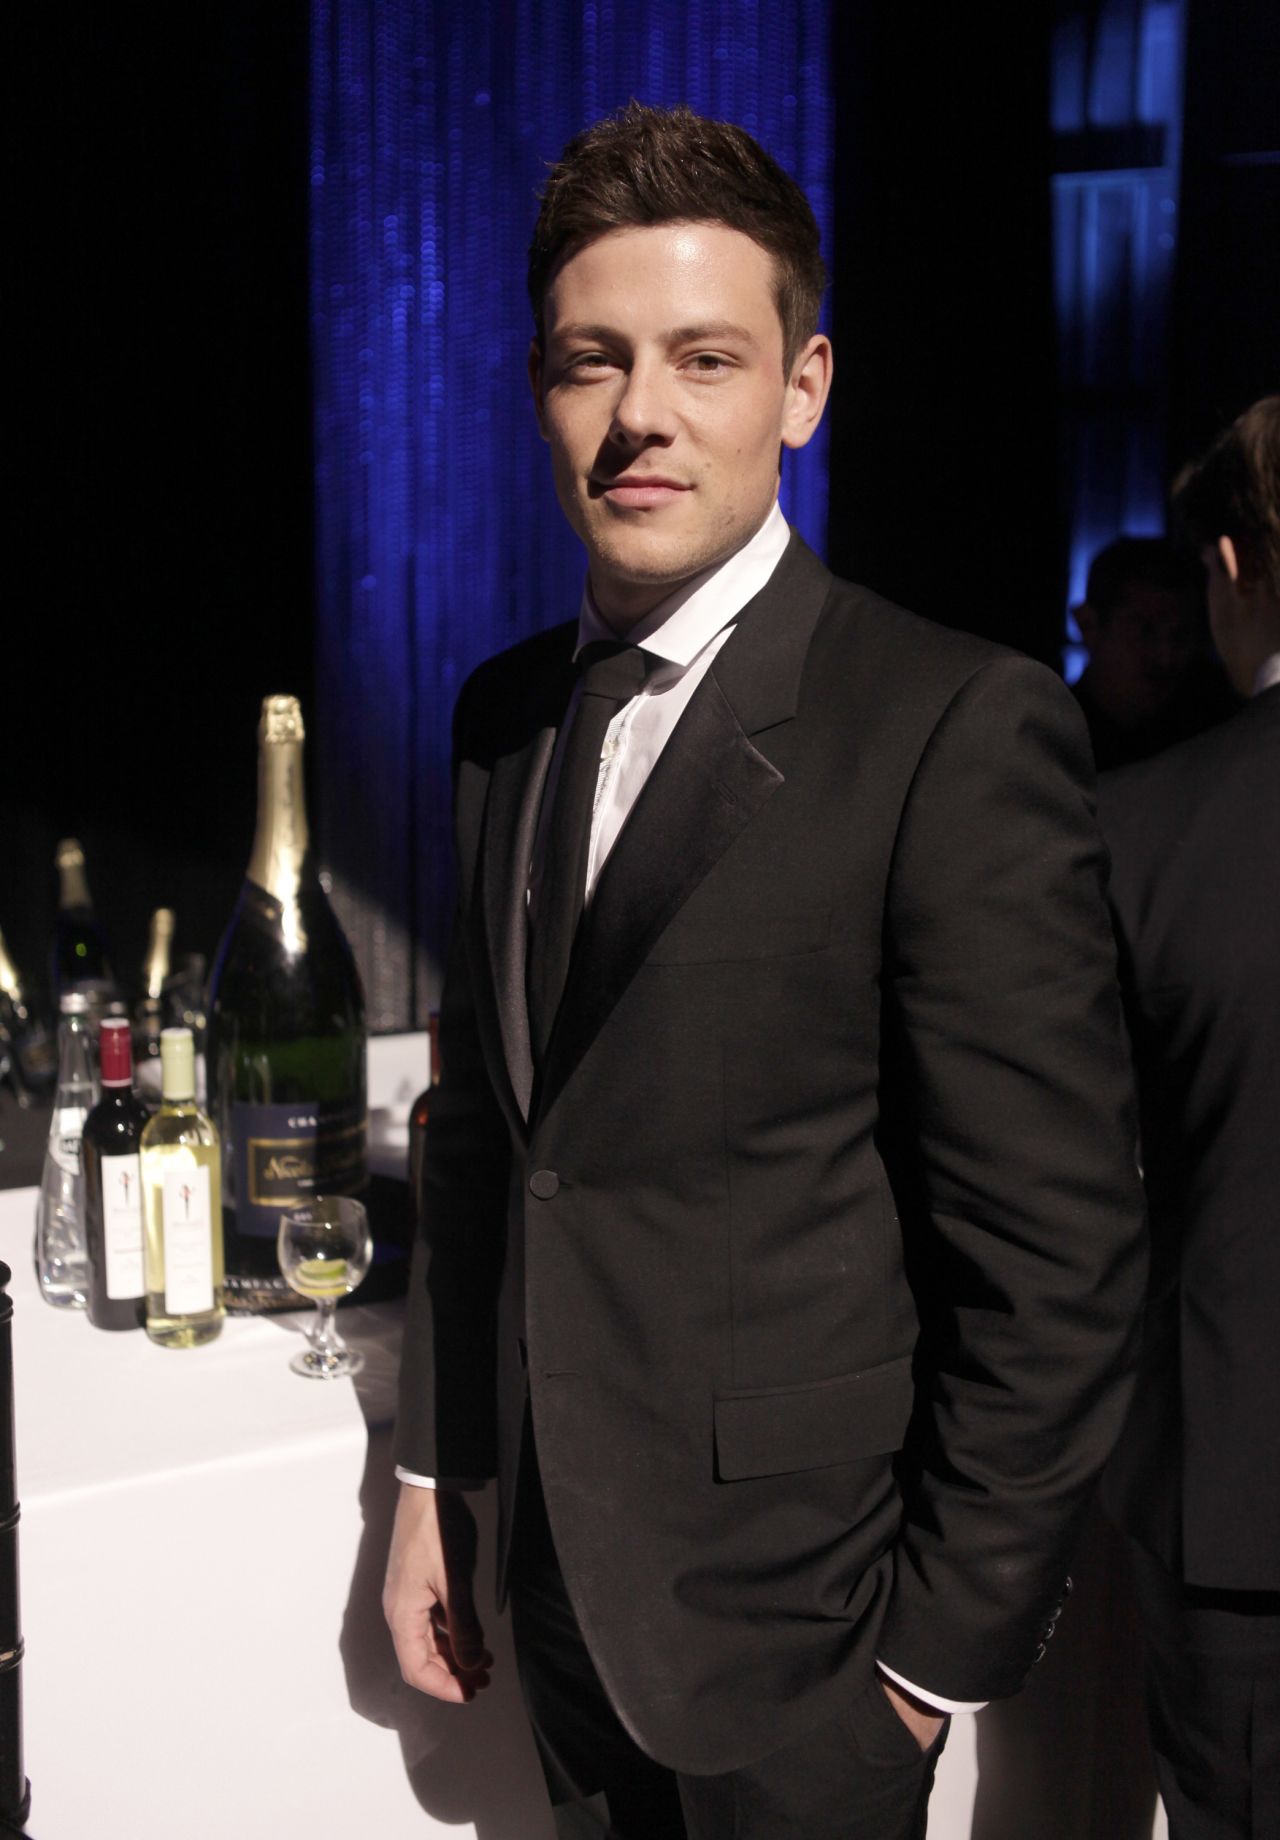 "Glee" star Cory Monteith was <a href="http://www.cnn.com/2013/07/14/showbiz/glee-star-dead/index.html">found dead</a> at a hotel in Vancouver on July 13, 2013. Officials gave the cause as "mixed drug toxicity, involving intravenous heroin use combined with the ingestion of alcohol." Monteith had been public about his struggle with addiction and <a href="http://marquee.blogs.cnn.com/2013/04/01/glee-star-cory-monteith-checks-into-rehab/">checked into a rehab facility</a> in late March. He <a href="http://www.parade.com/celebrity/2011/06/cory-monteith-glee.html" target="_blank" target="_blank">told Parade magazine</a> that he started using drugs at 13 and had entered rehab by 19. 